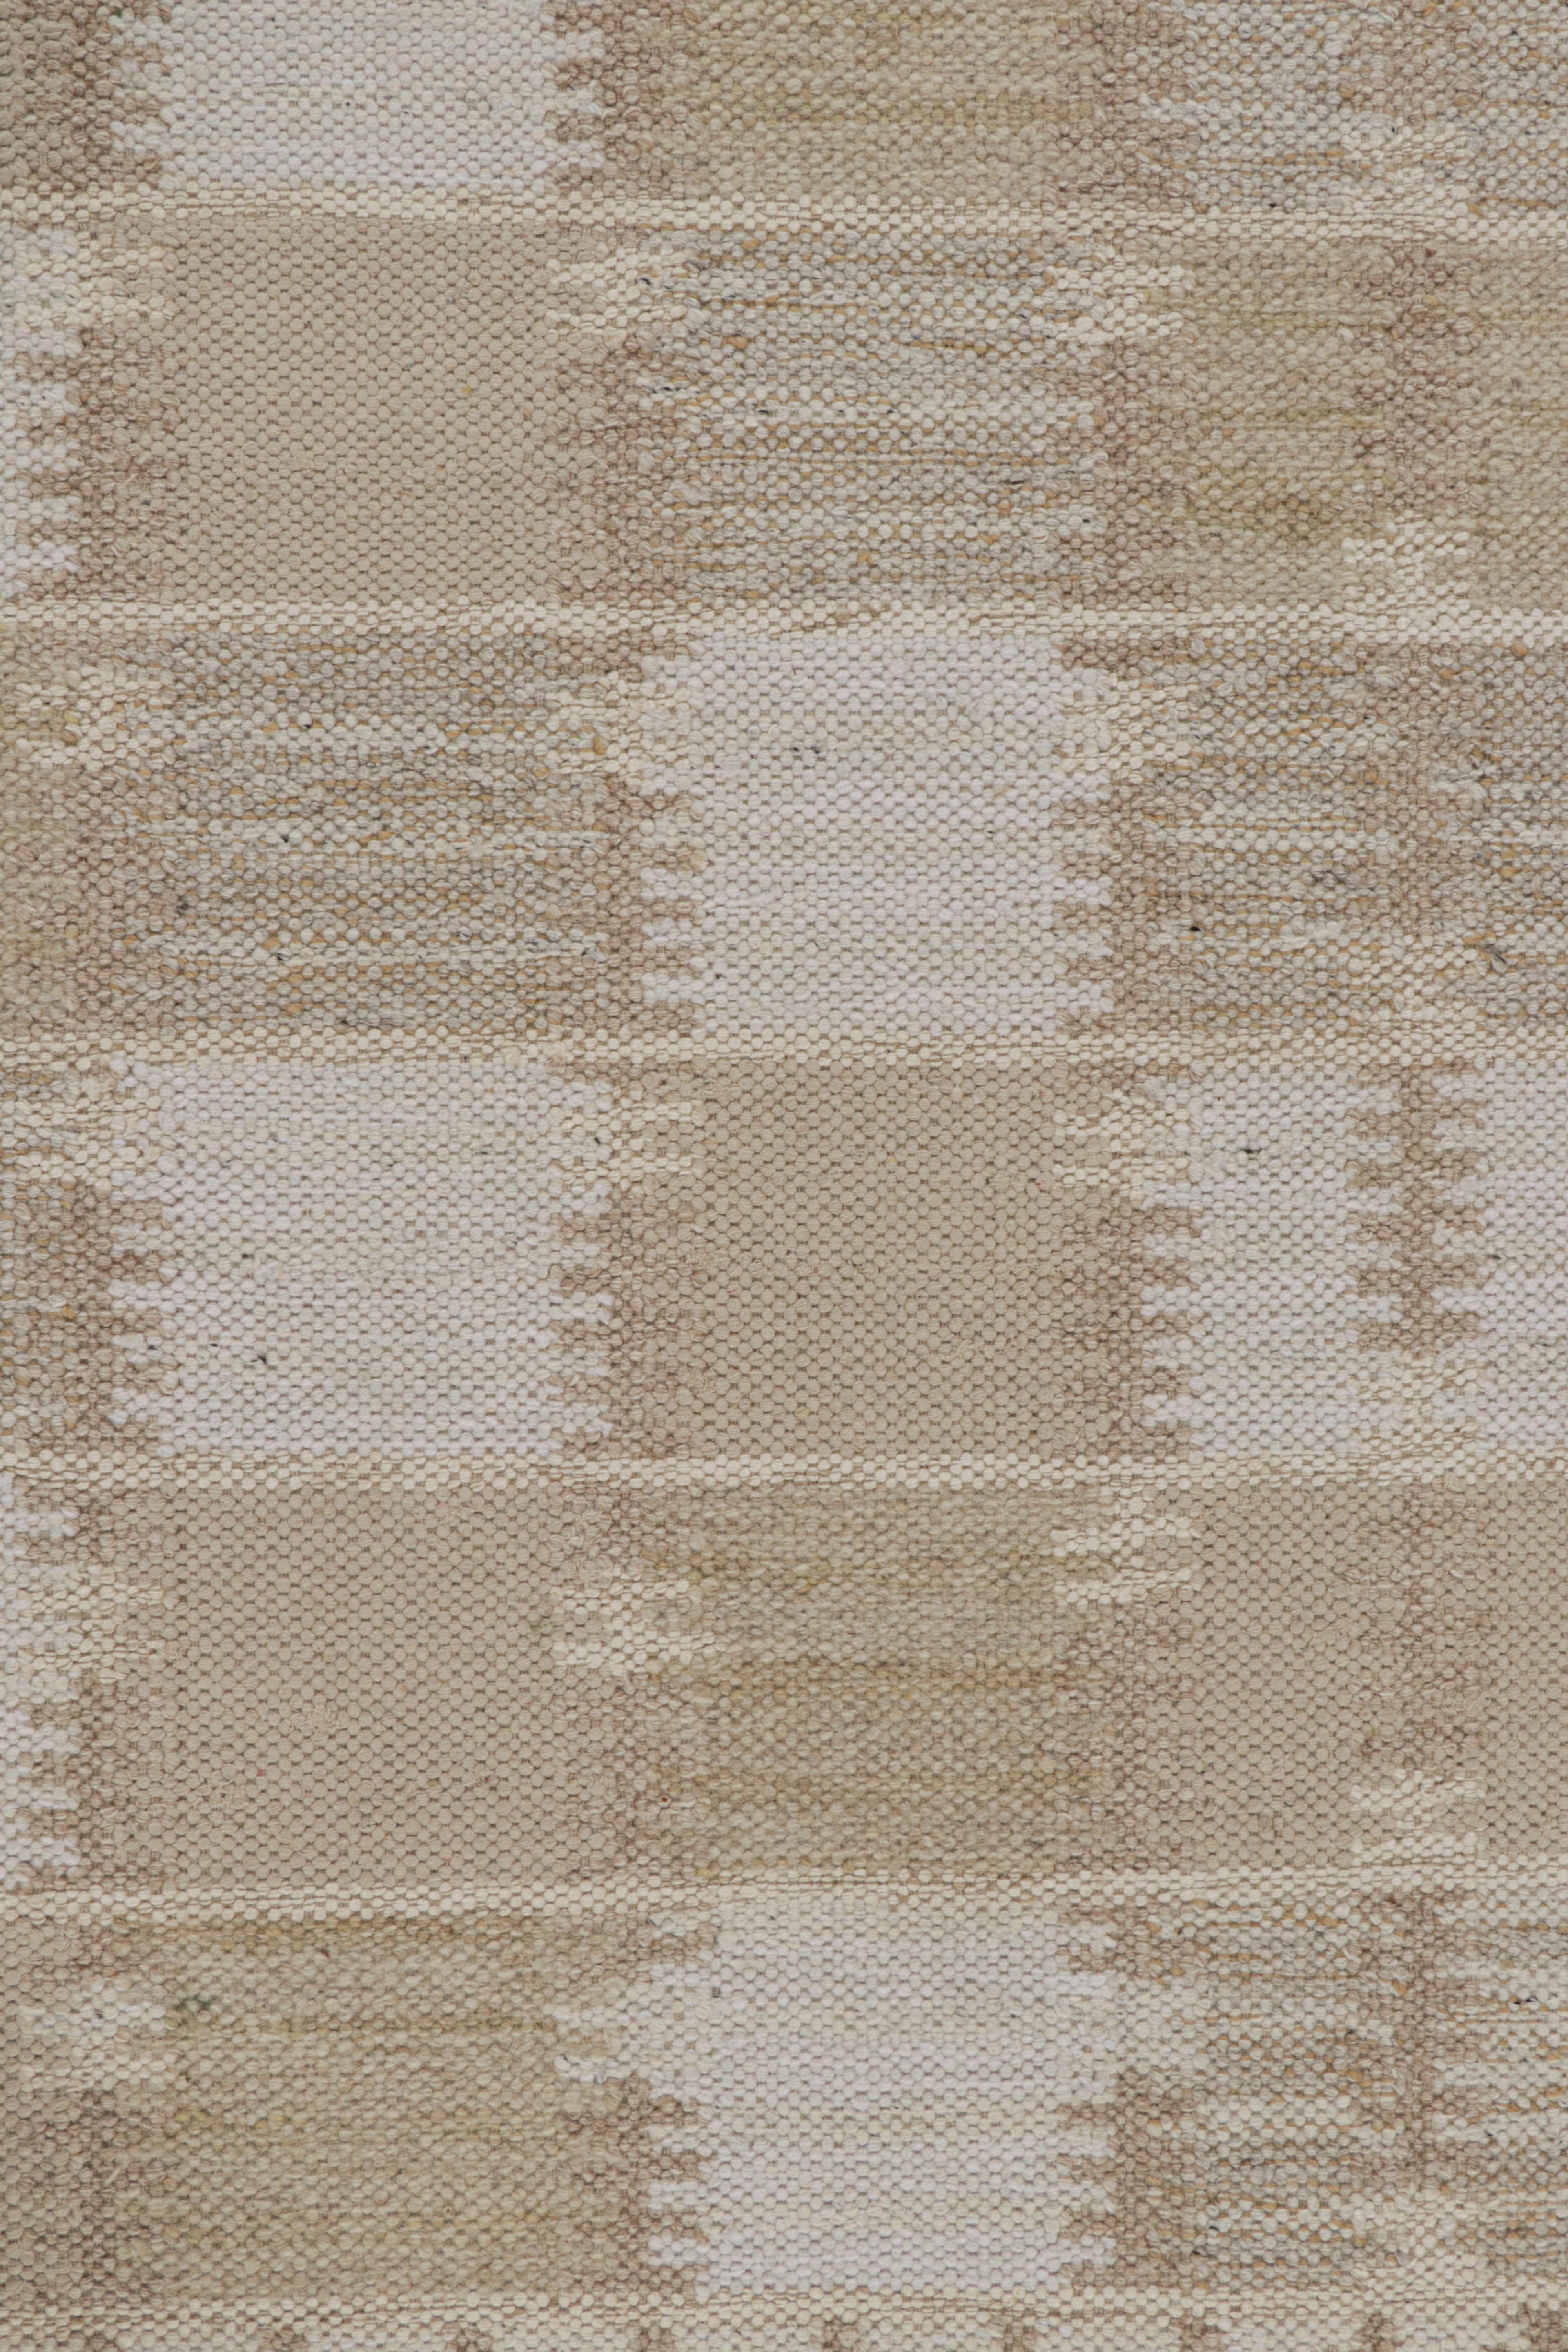 Rug & Kilim’s Scandinavian Style Kilim in White & Brown Patterns In New Condition For Sale In Long Island City, NY